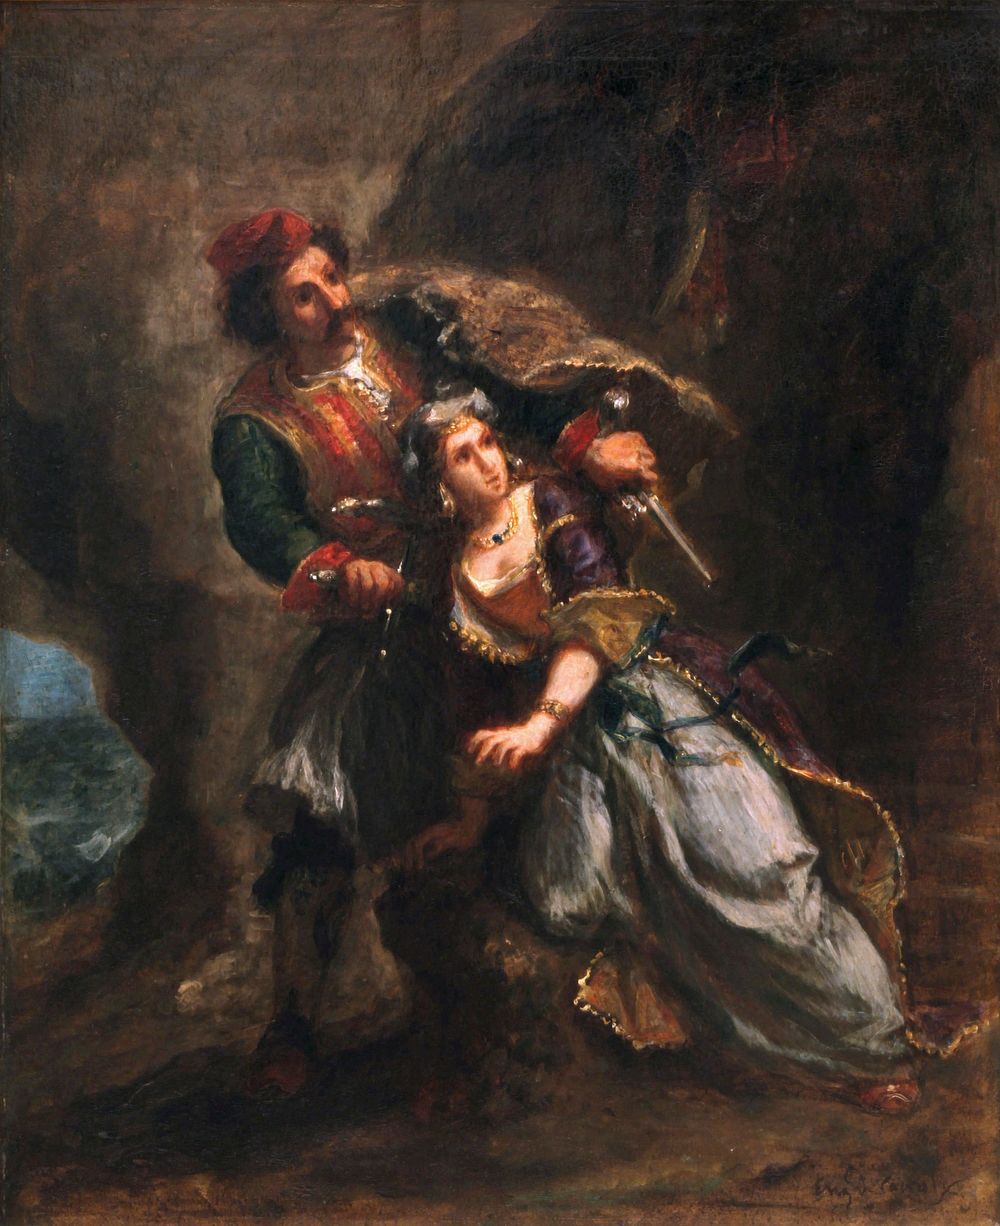 The painting depicts Selim and Zuleika from Lord Byron's poem The Bride of Abydos by Eug&egrave;ne Delacroix